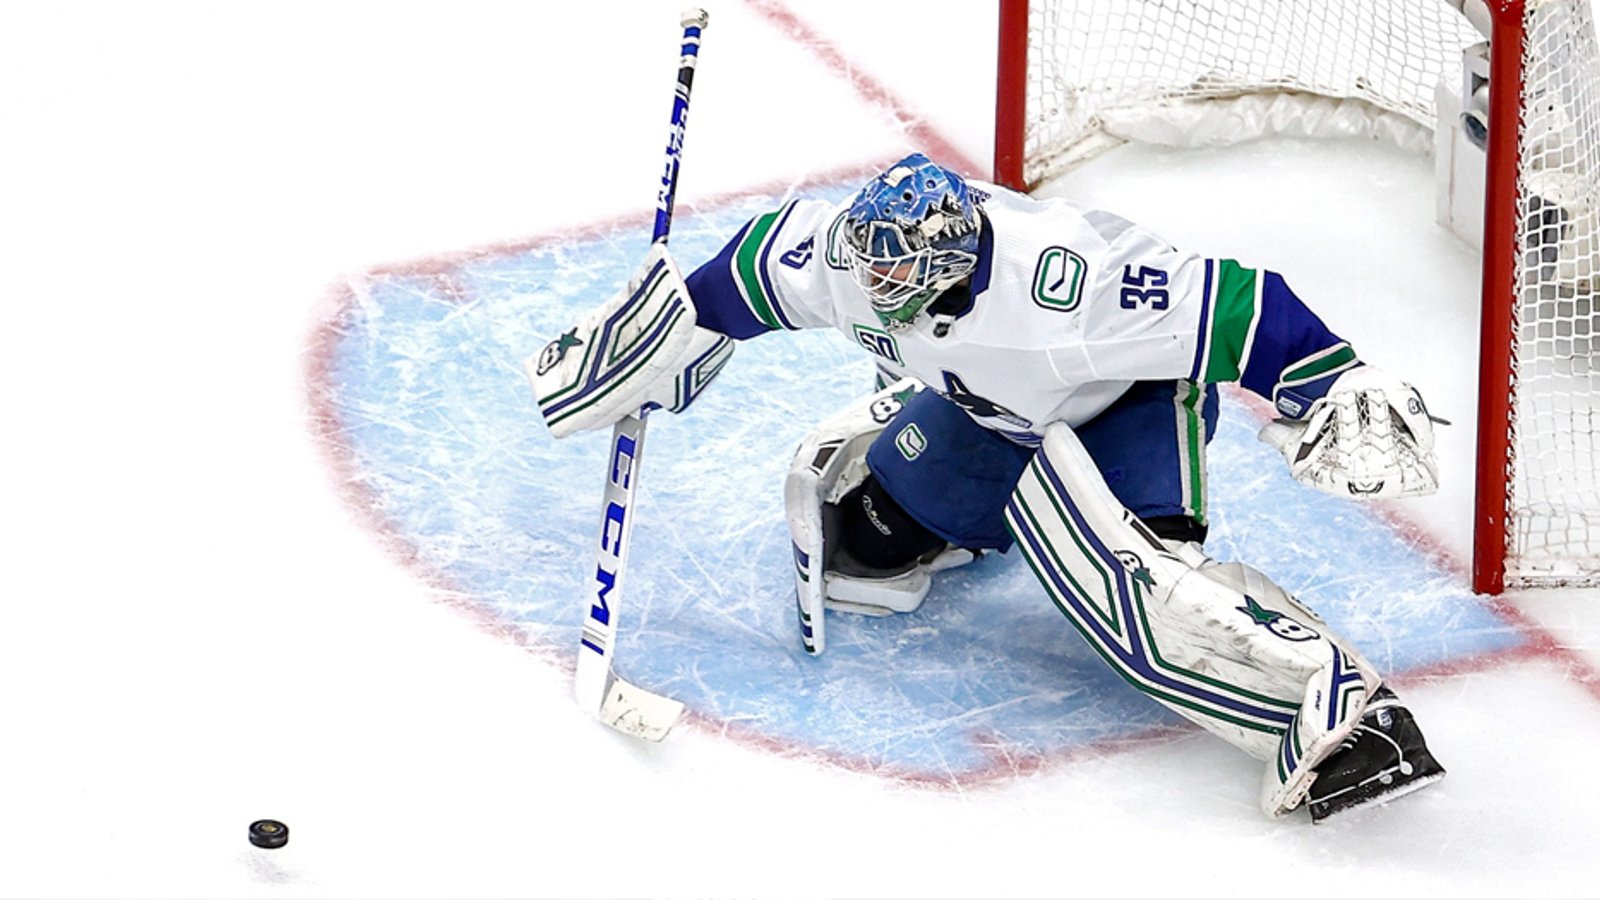 Canucks goalie Demko breaks several records with incredible performance from last night